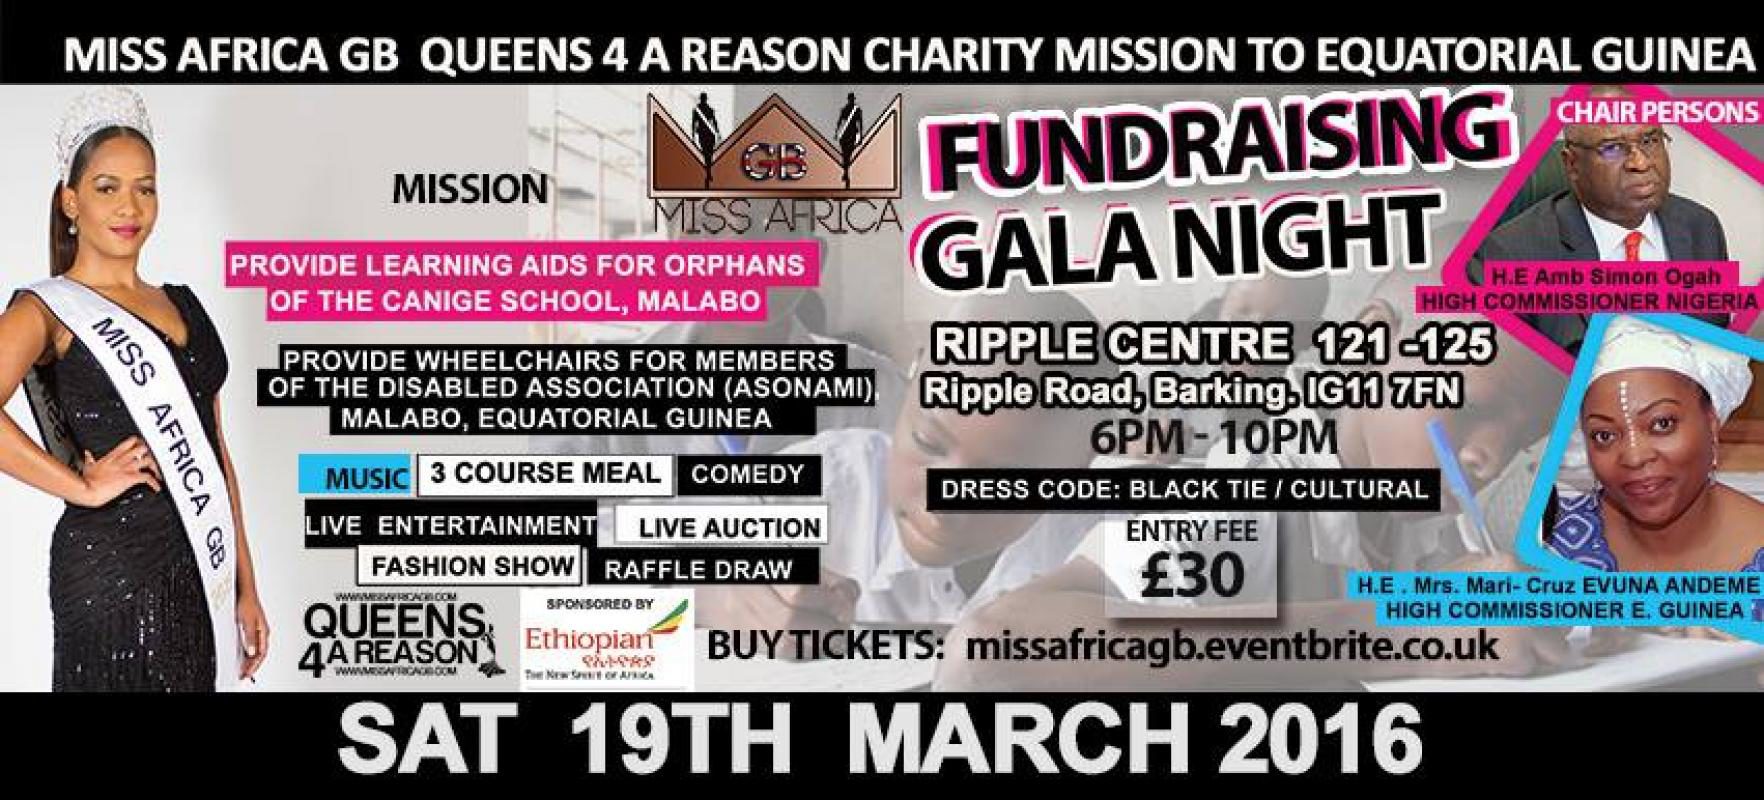 Miss Africa GB 2015 - Queens-4-a-Reason Charity Mission to Equatorial Guinea - Guest speaker